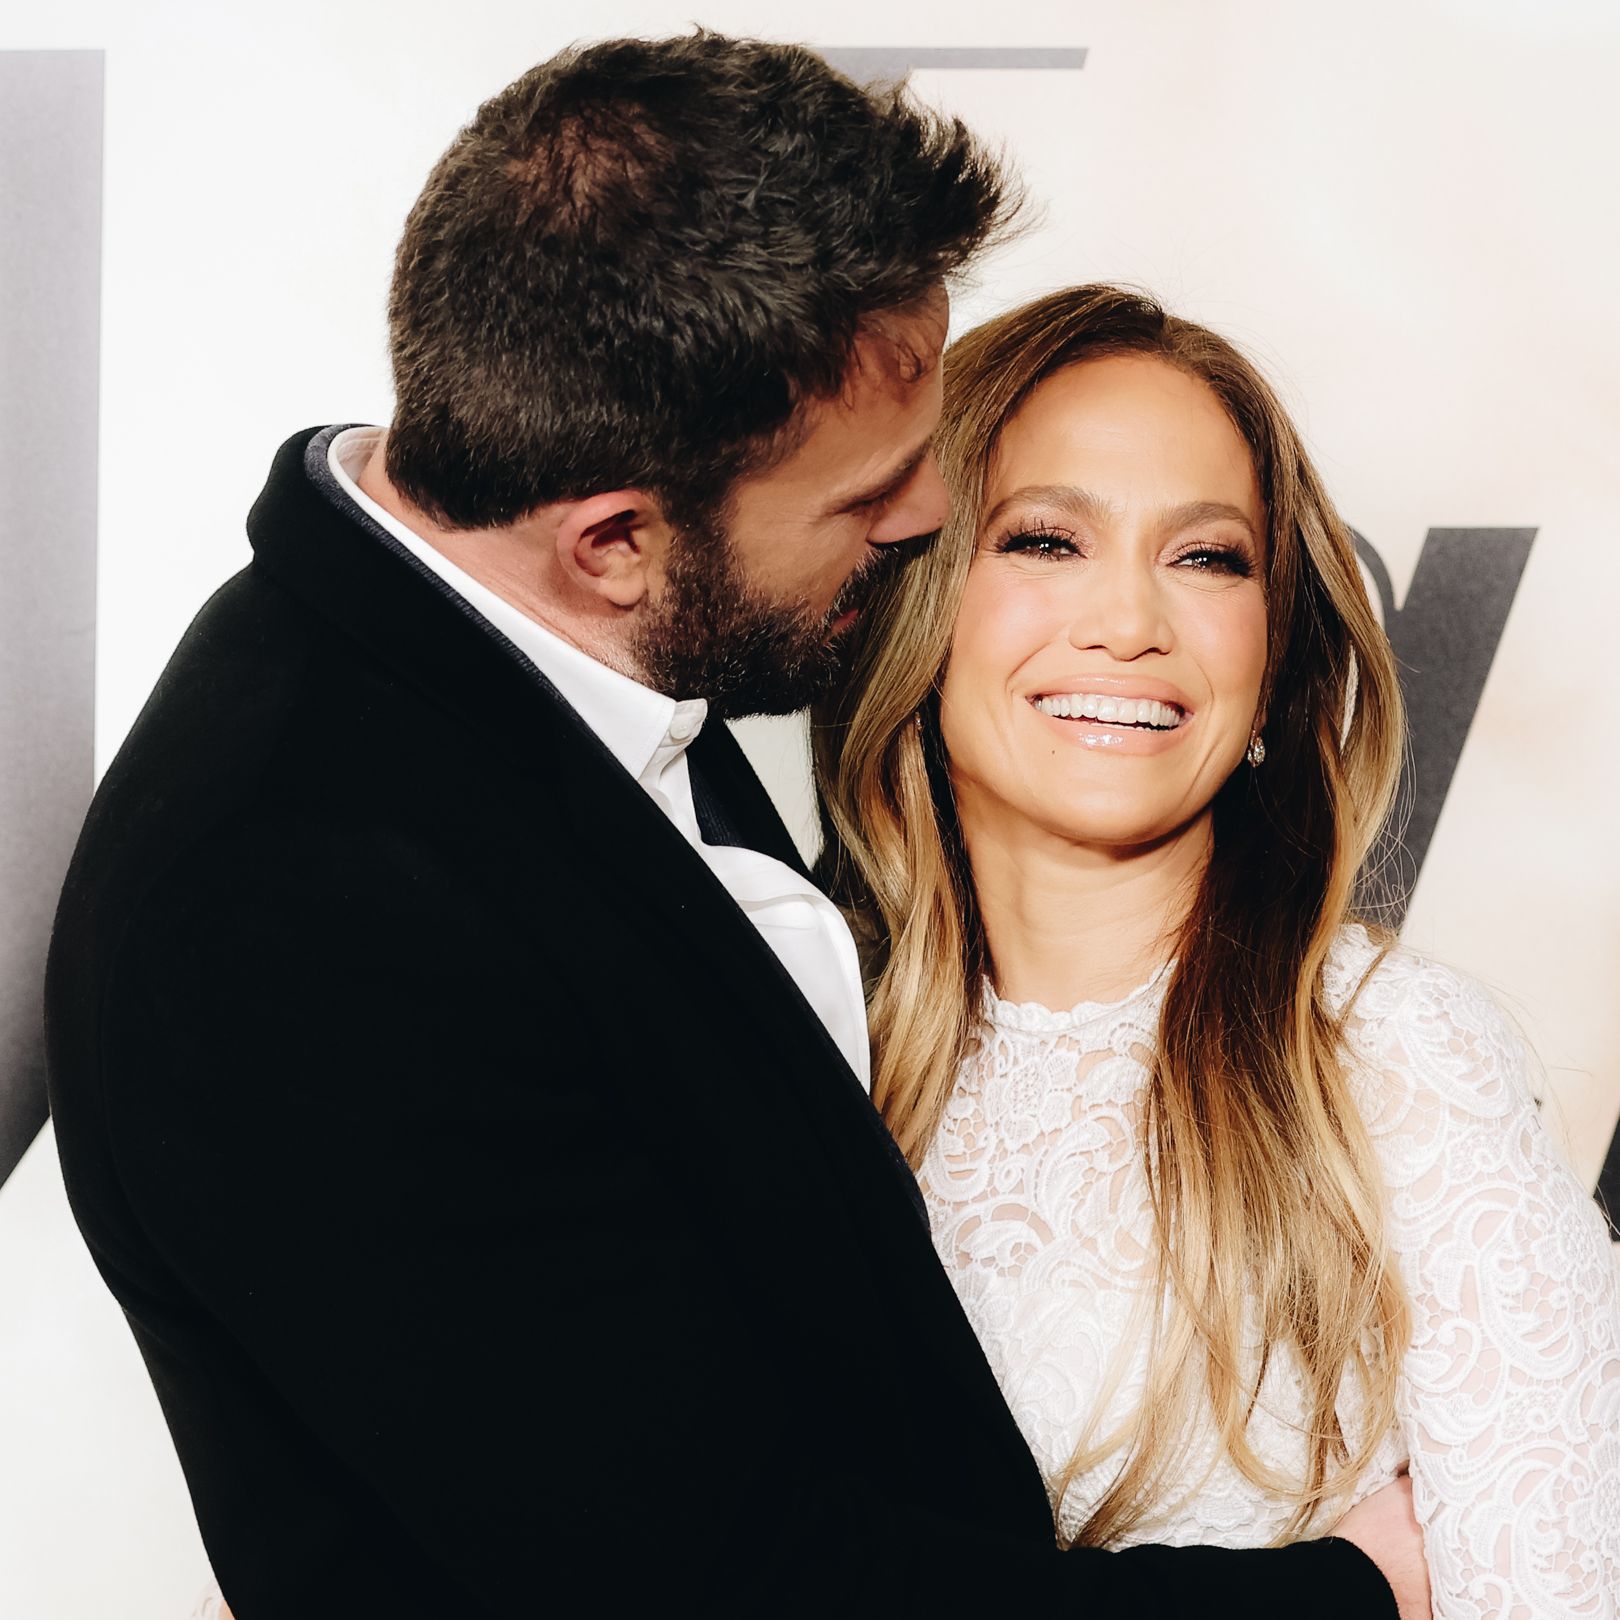 Jennifer Lopez and Ben Affleck Reportedly Got Married in Las Vegas This Weekend